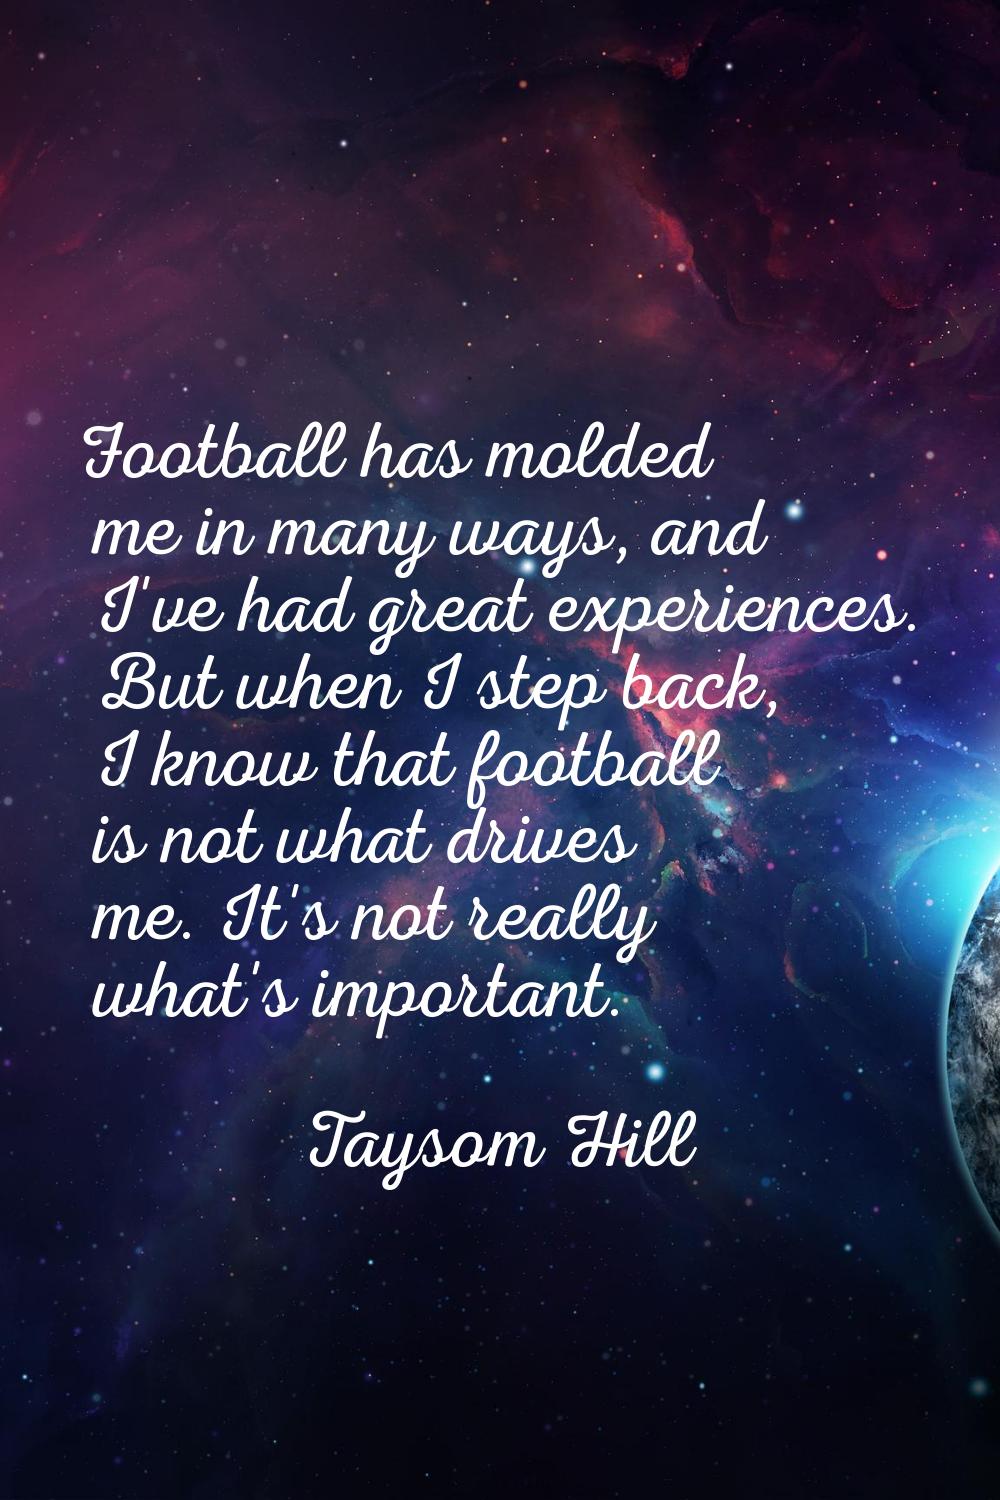 Football has molded me in many ways, and I've had great experiences. But when I step back, I know t